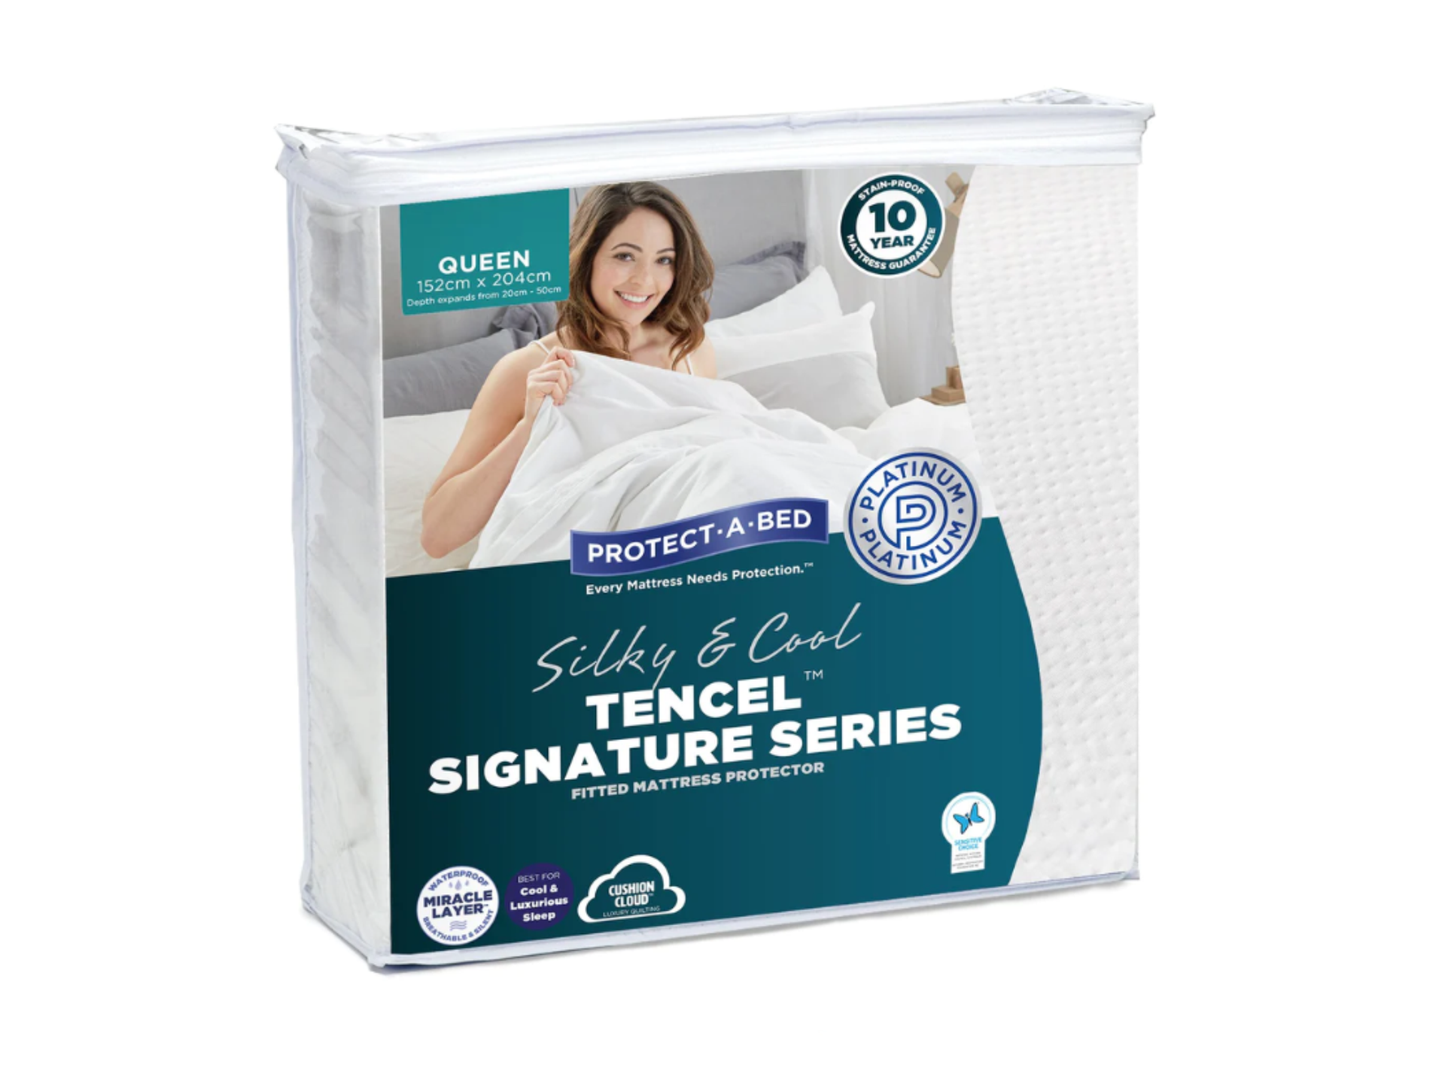 Protect-A-Bed Bundle featuring Tencel® Signature Series King Single